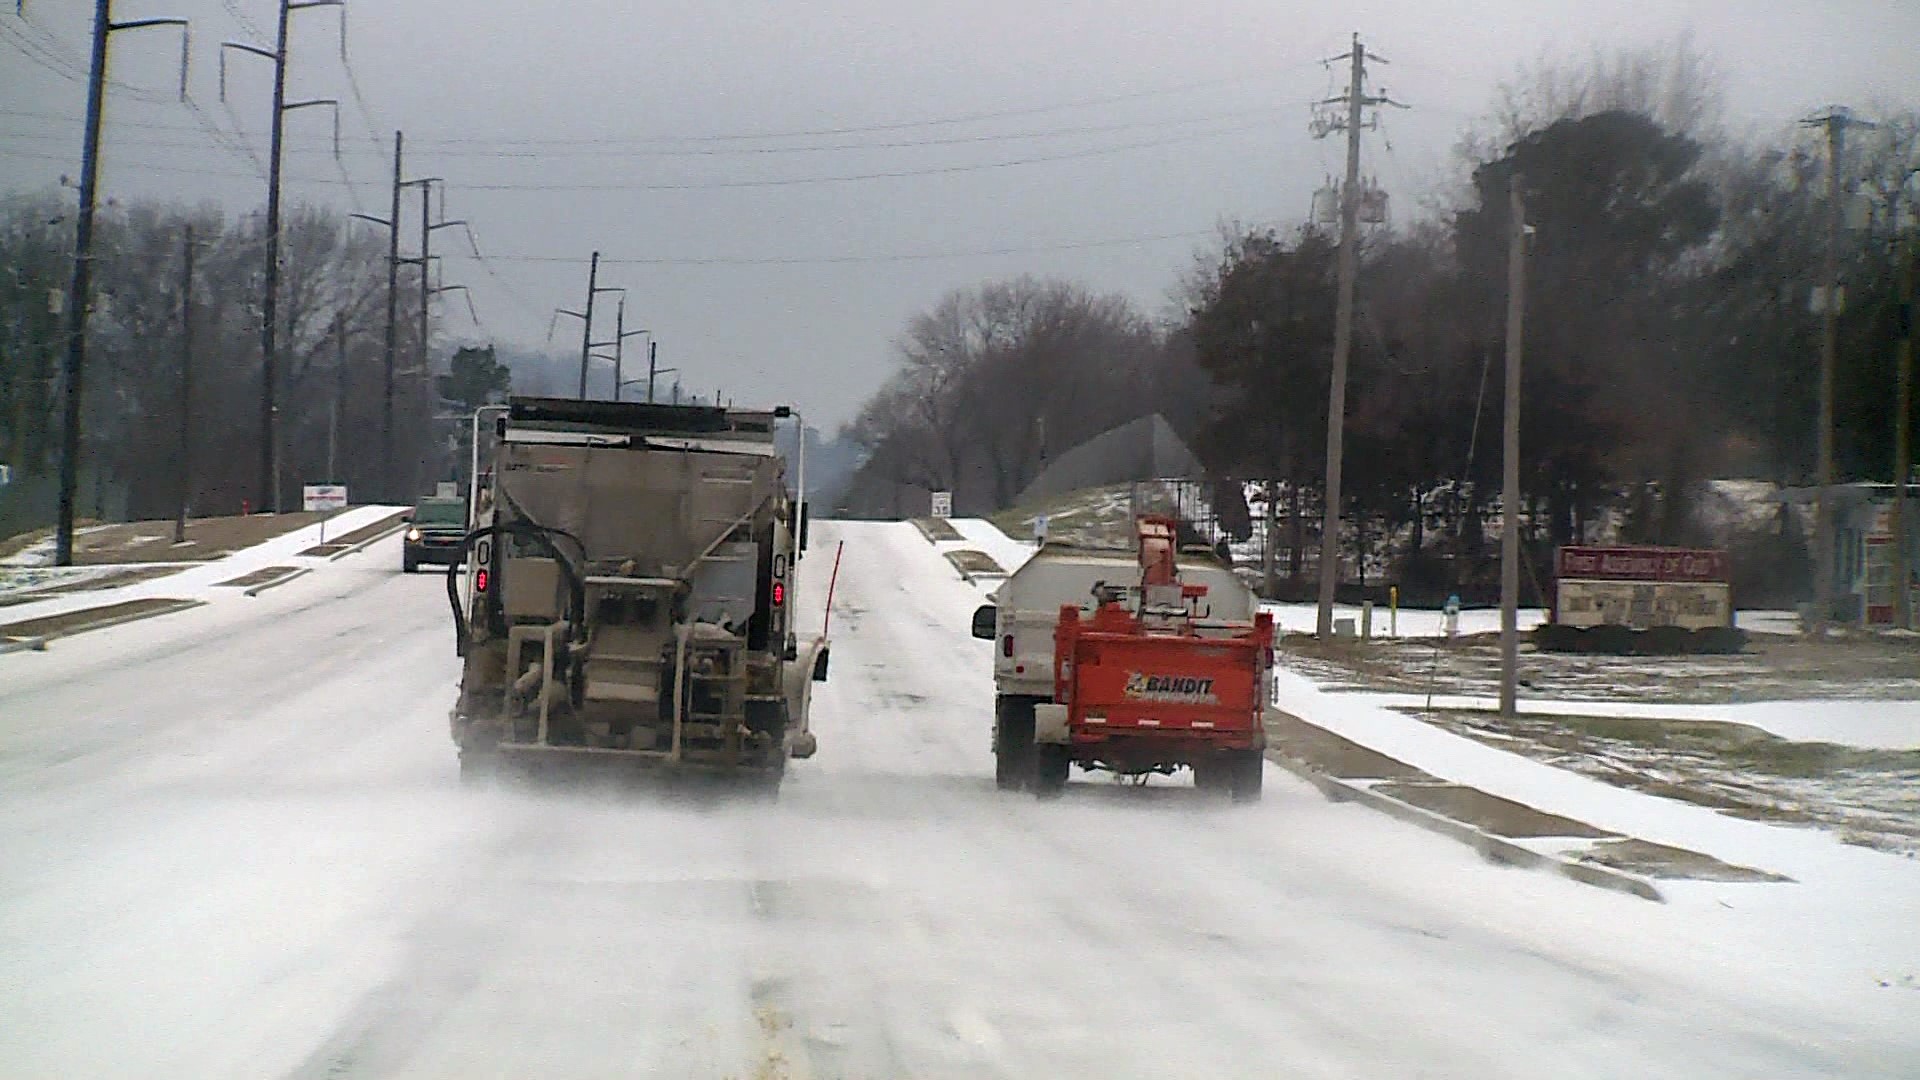 Officials say they have at least 20 full-time workers treating roads or preparing salts around the clock.